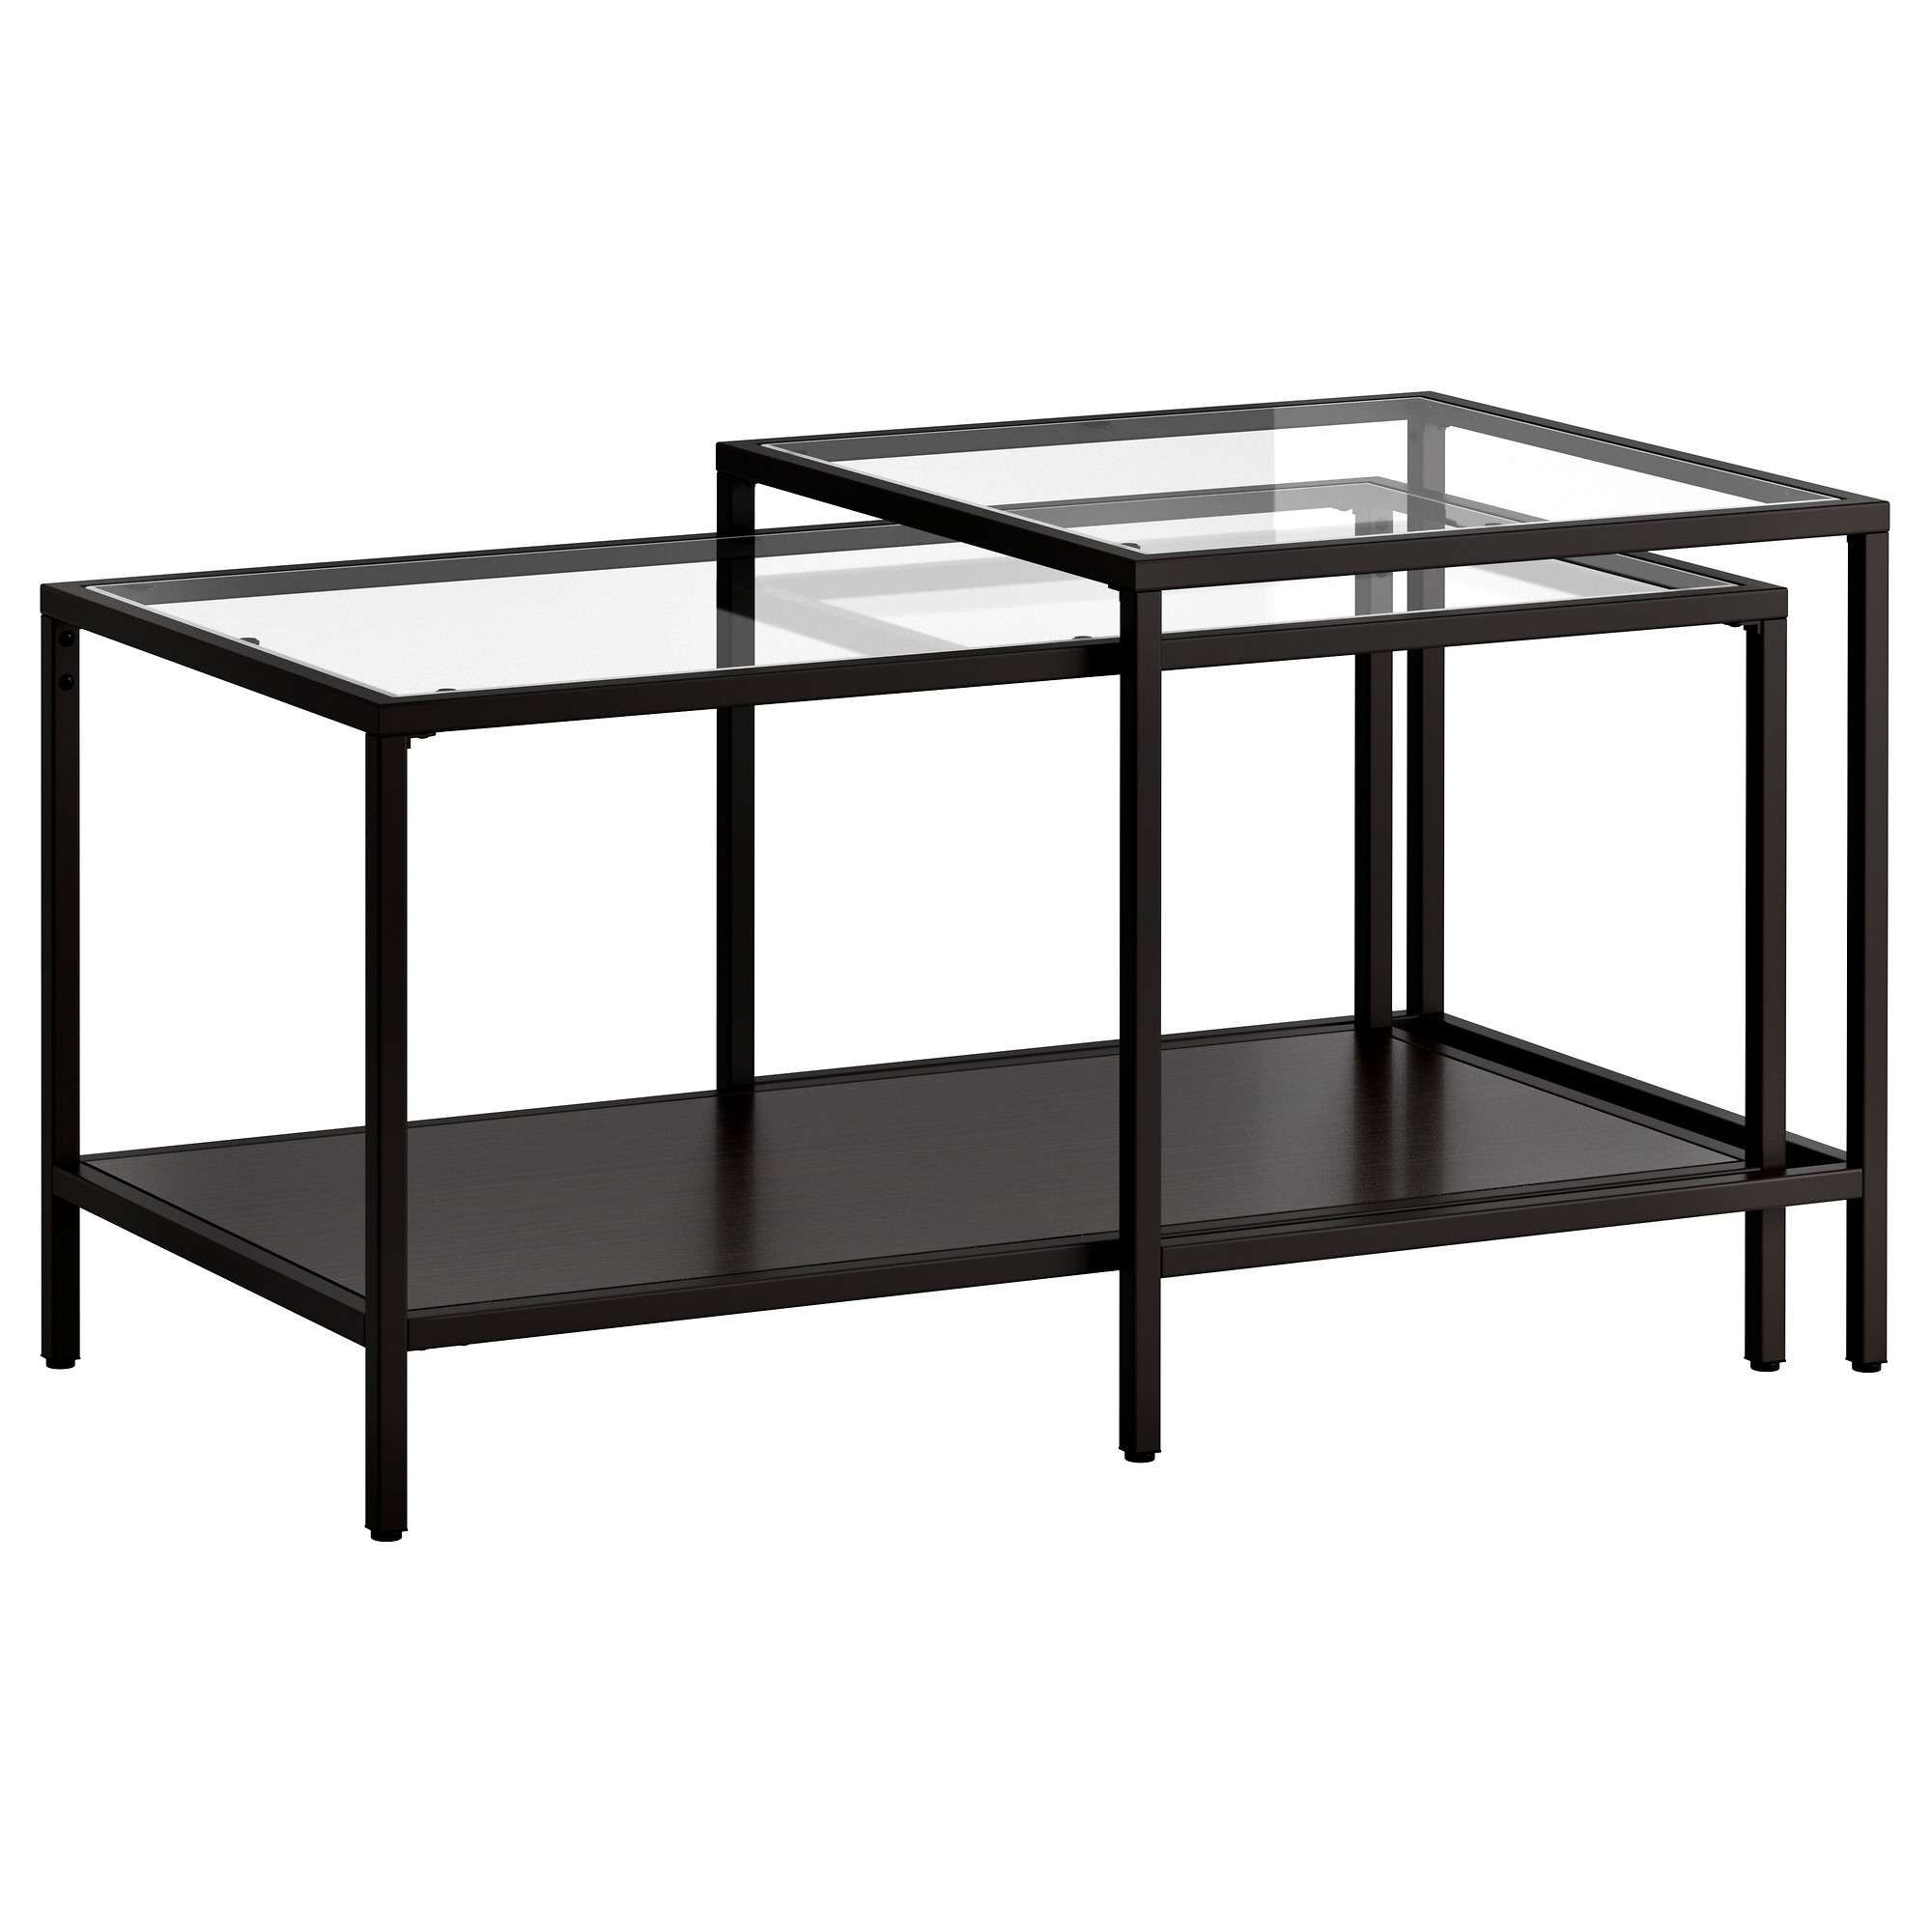 Vittsjö Nesting Tables, Set Of 2 – Black Brown/glass – Ikea Inside Newest Glass And Black Metal Coffee Table (View 6 of 20)